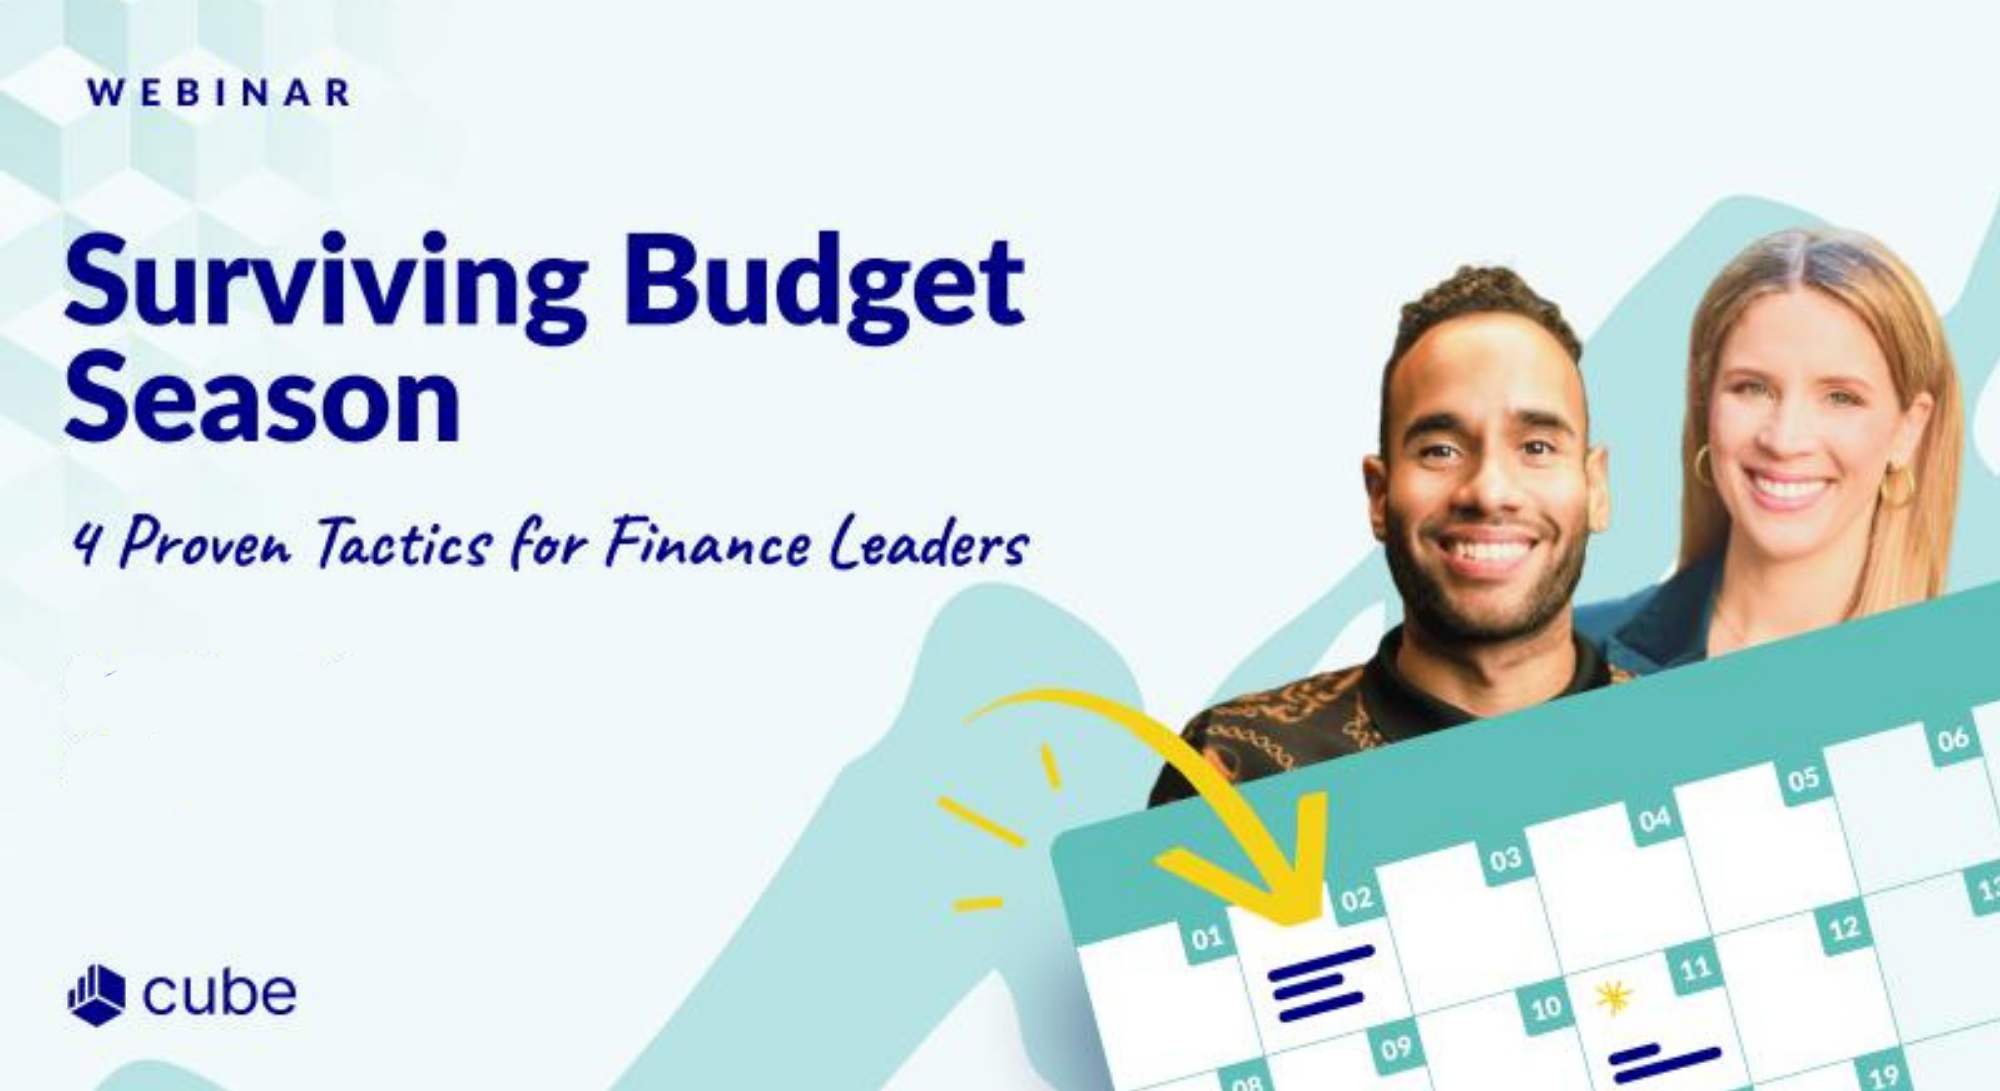 4 proven tactics to survive budget season for finance leaders (video included!)